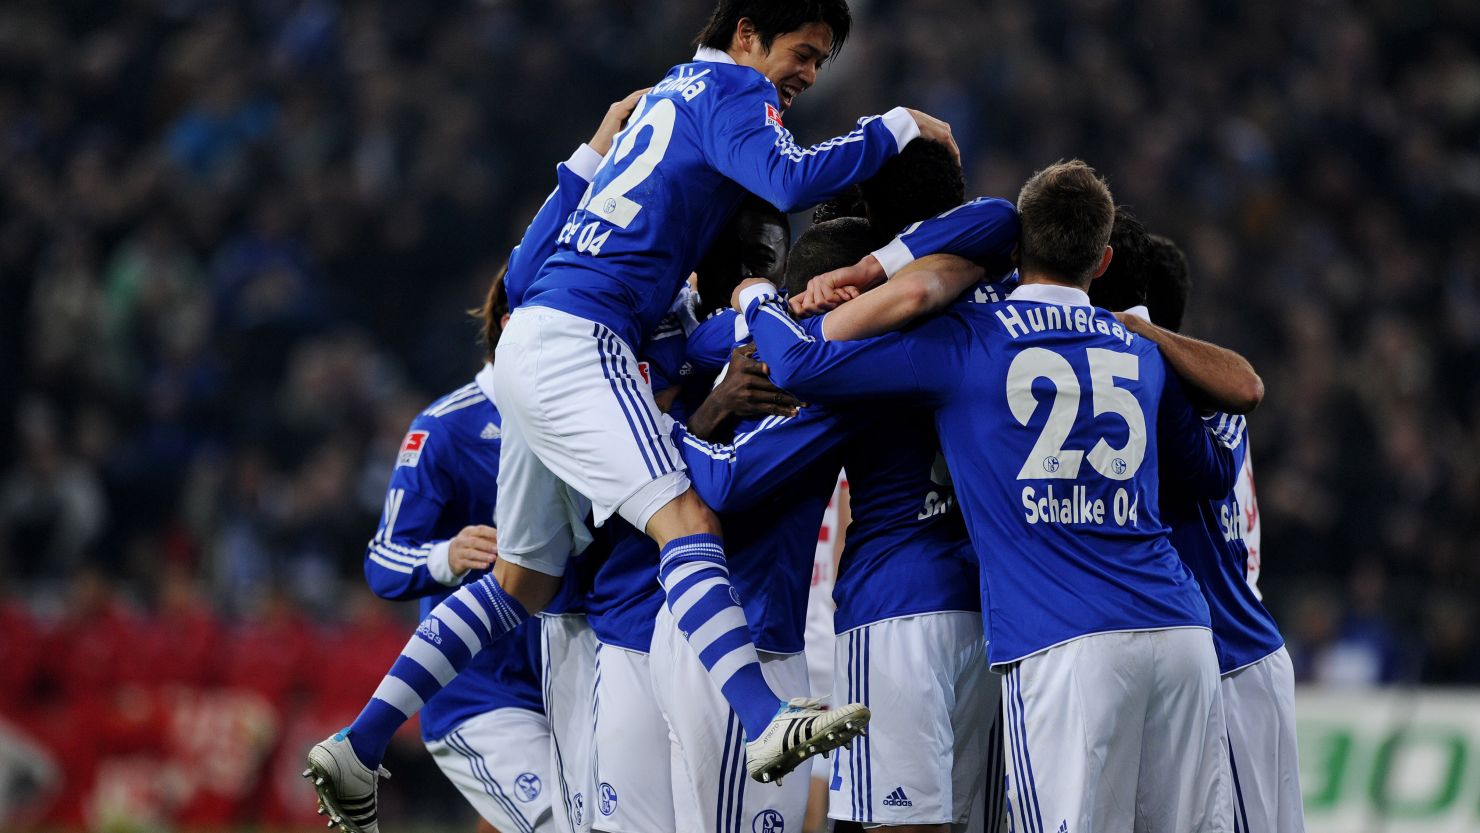 Schalke players celebrate a goal during a 3-1 win over Stuttgart in the Bundesliga on Saturday 